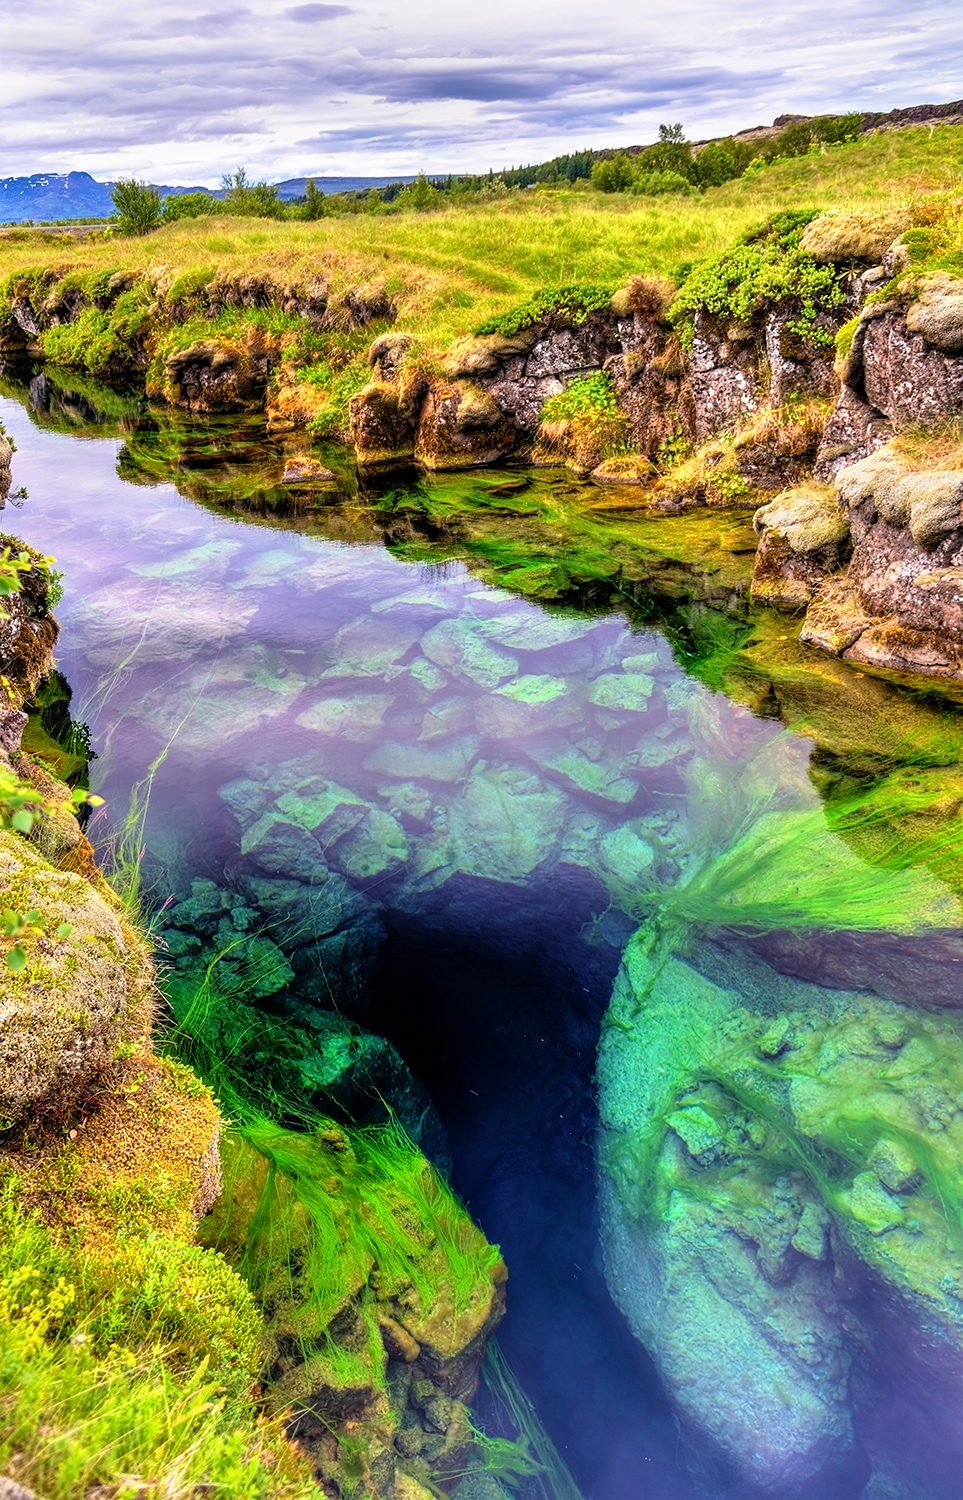 Water in a fissure between tectonic plates in Iceland